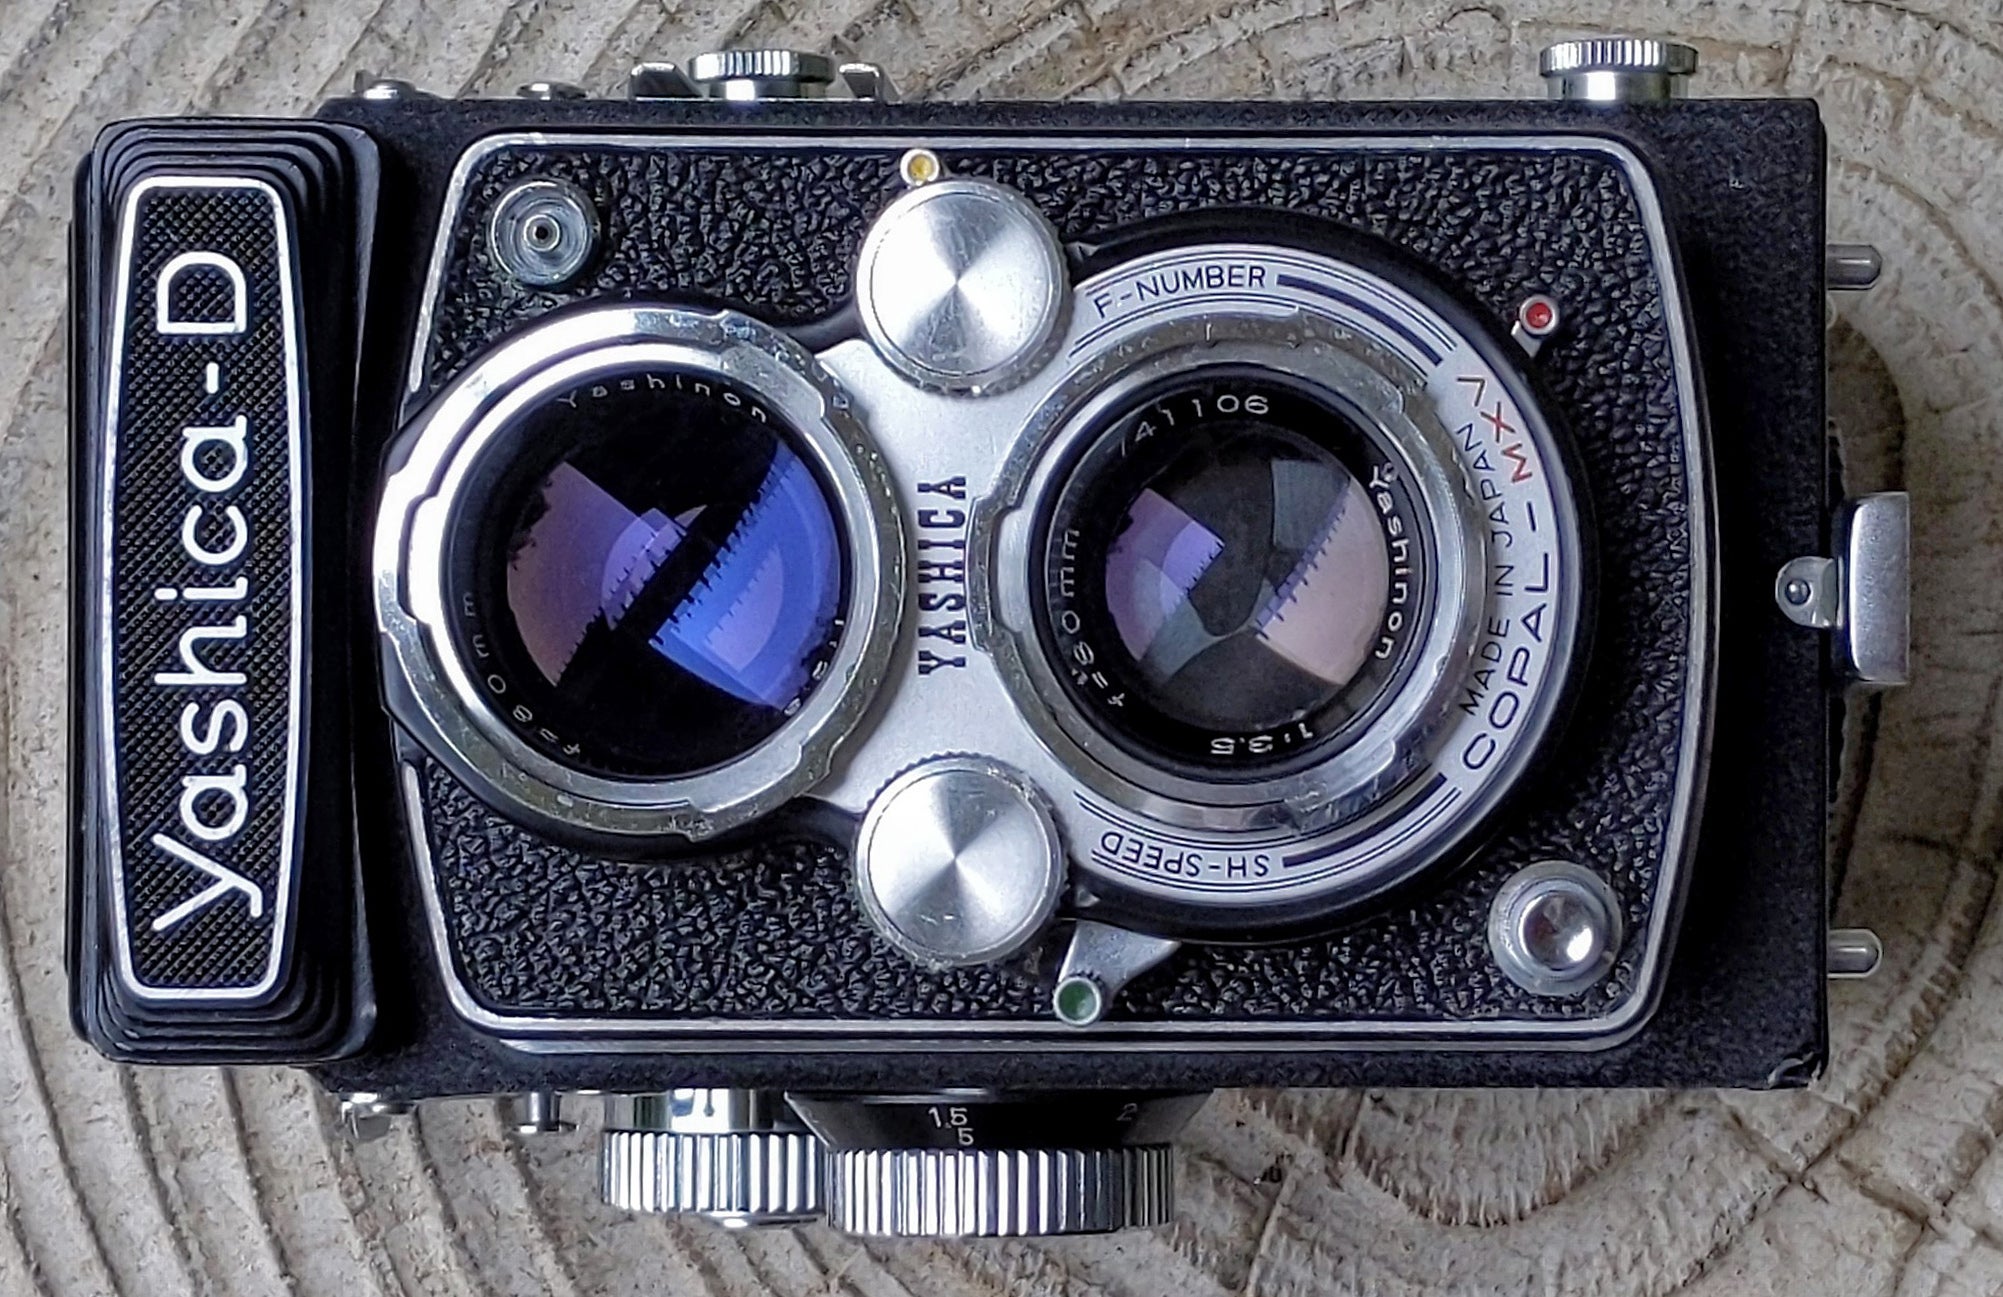 The Yashica-D TLR